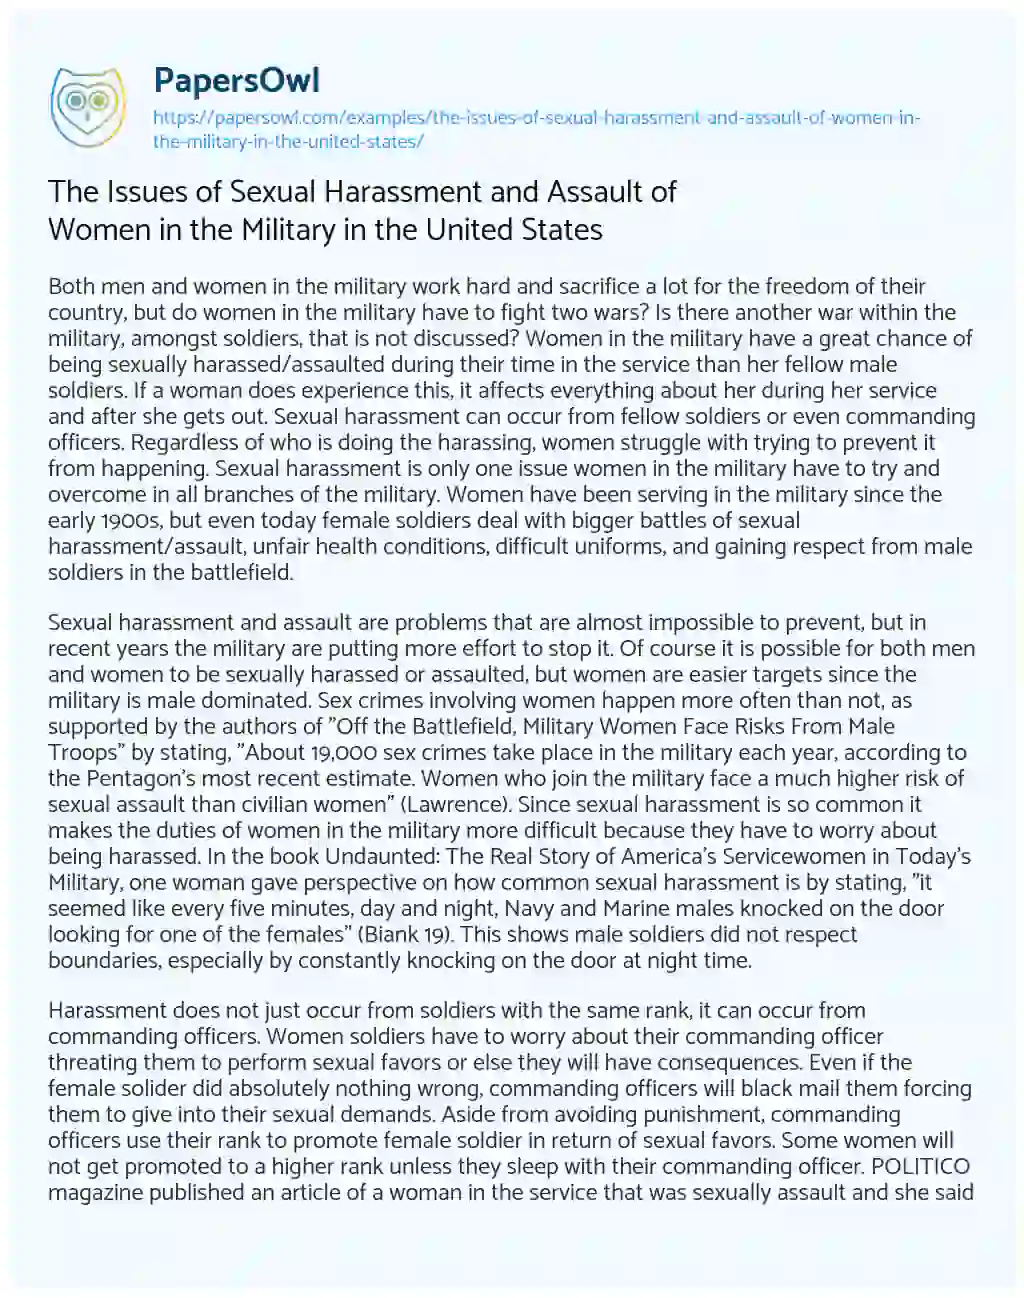 Essay on The Issues of Sexual Harassment and Assault of Women in the Military in the United States